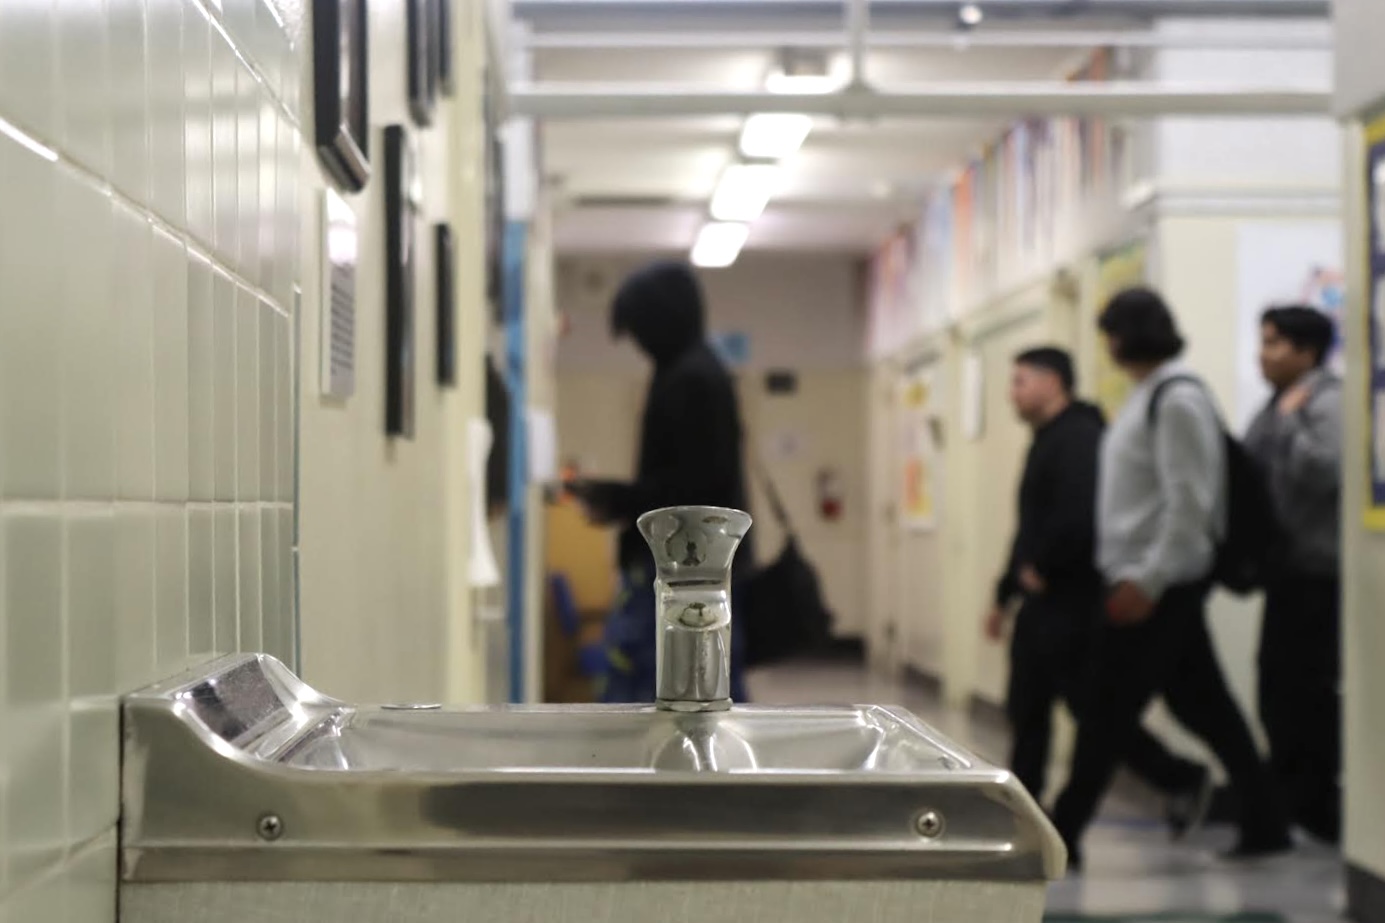 Six DPMHS water fountains shut off due to high lead levels